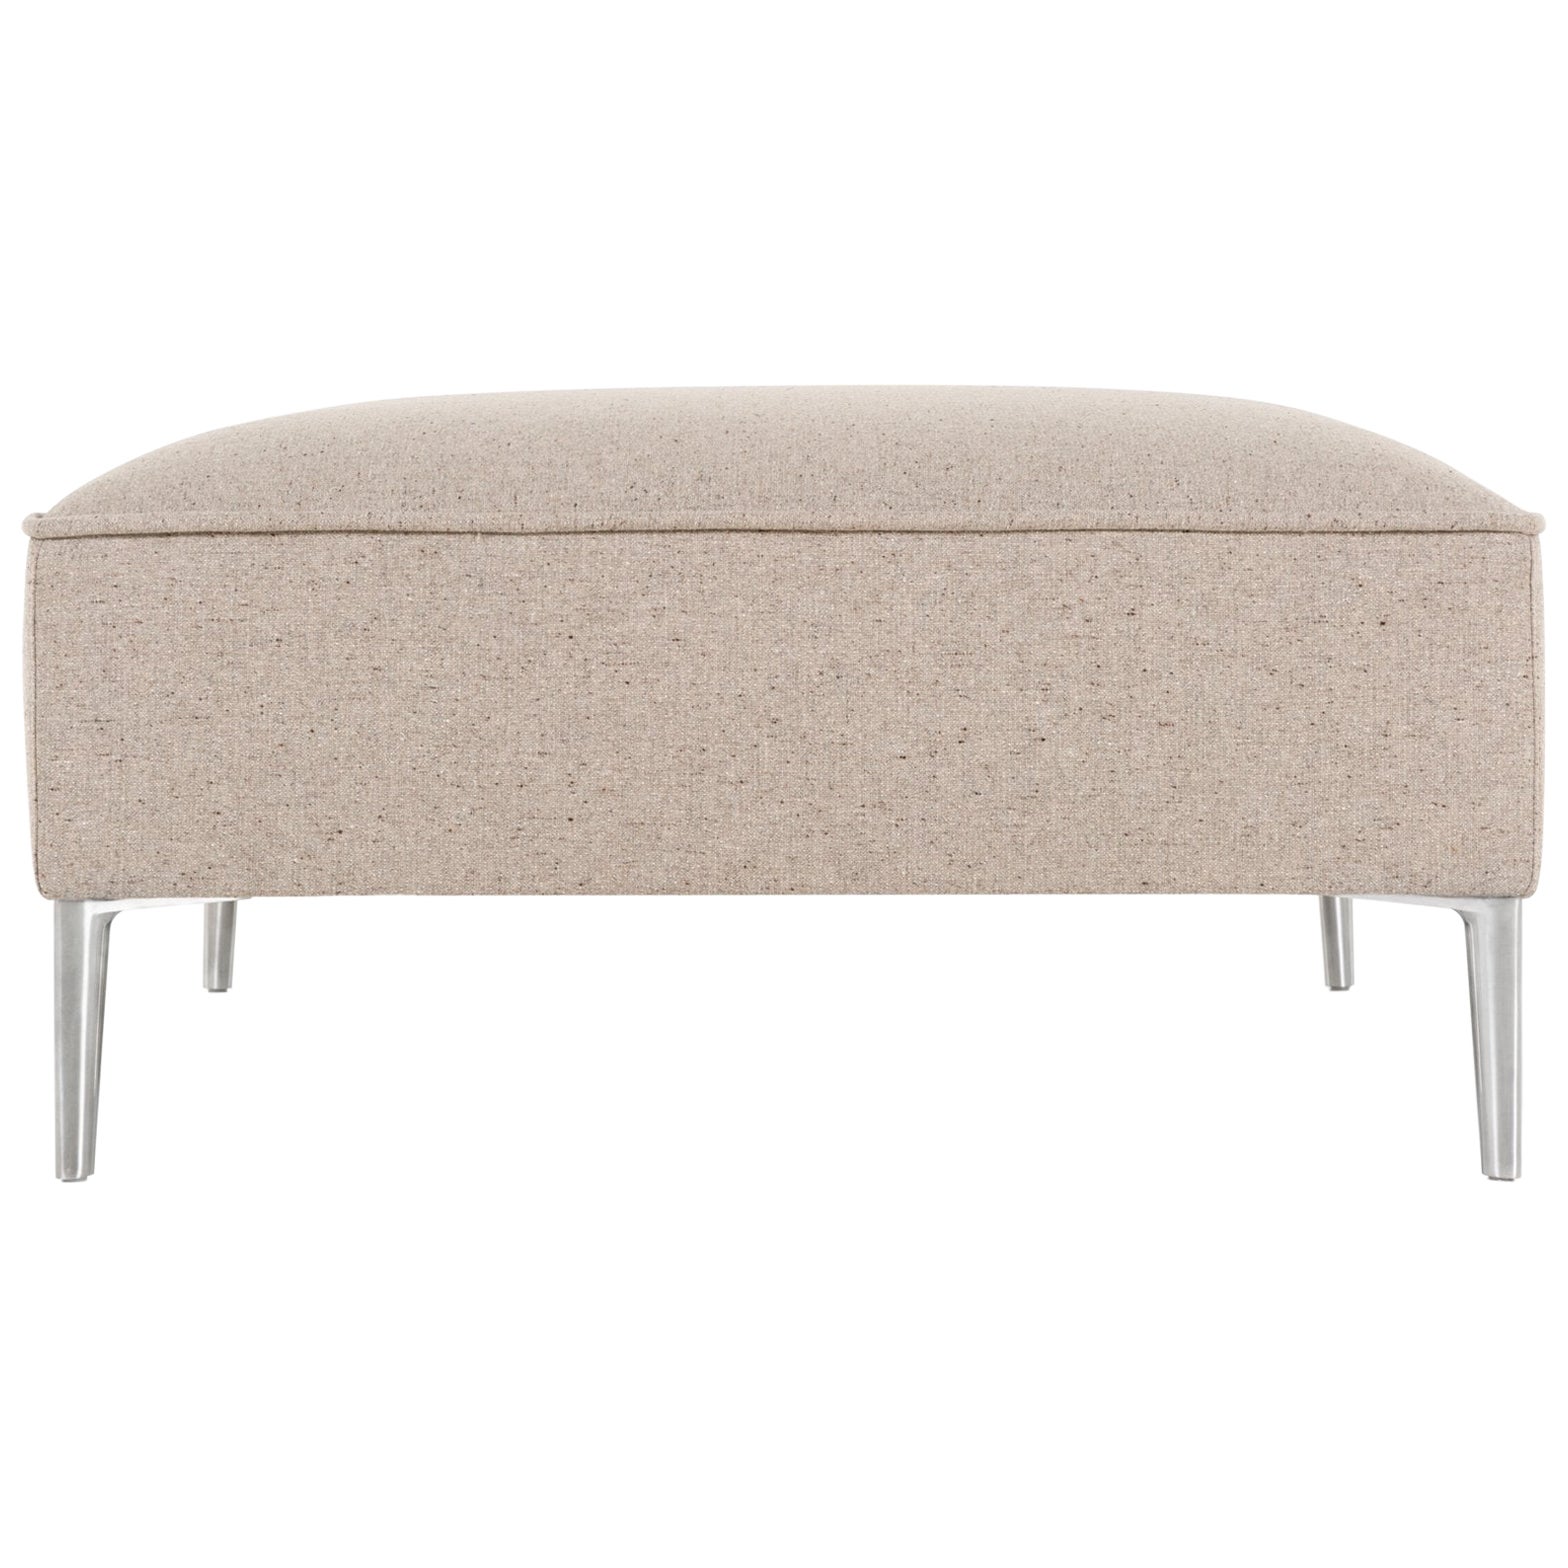 Moooi Sofa So Good Footstool in Solis Paper Upholstery & Polished Aluminum Feet For Sale